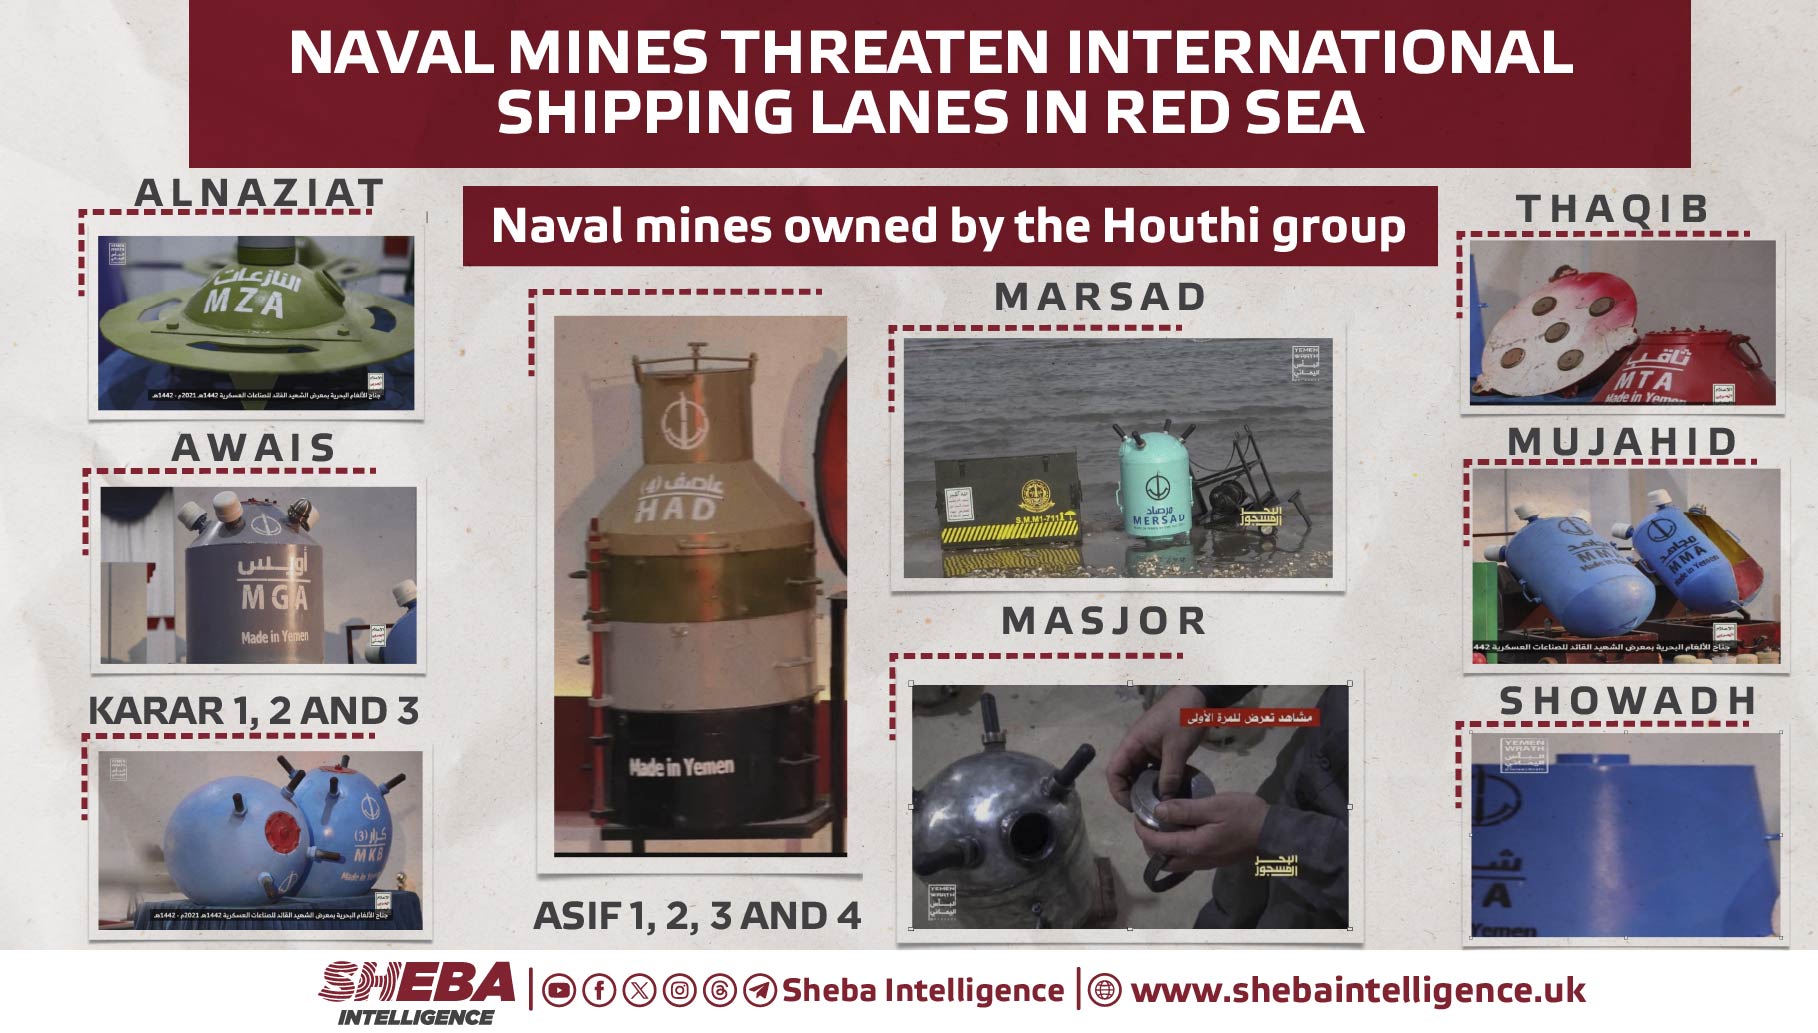 Naval Mines Threaten International Shipping Lanes in Red Sea